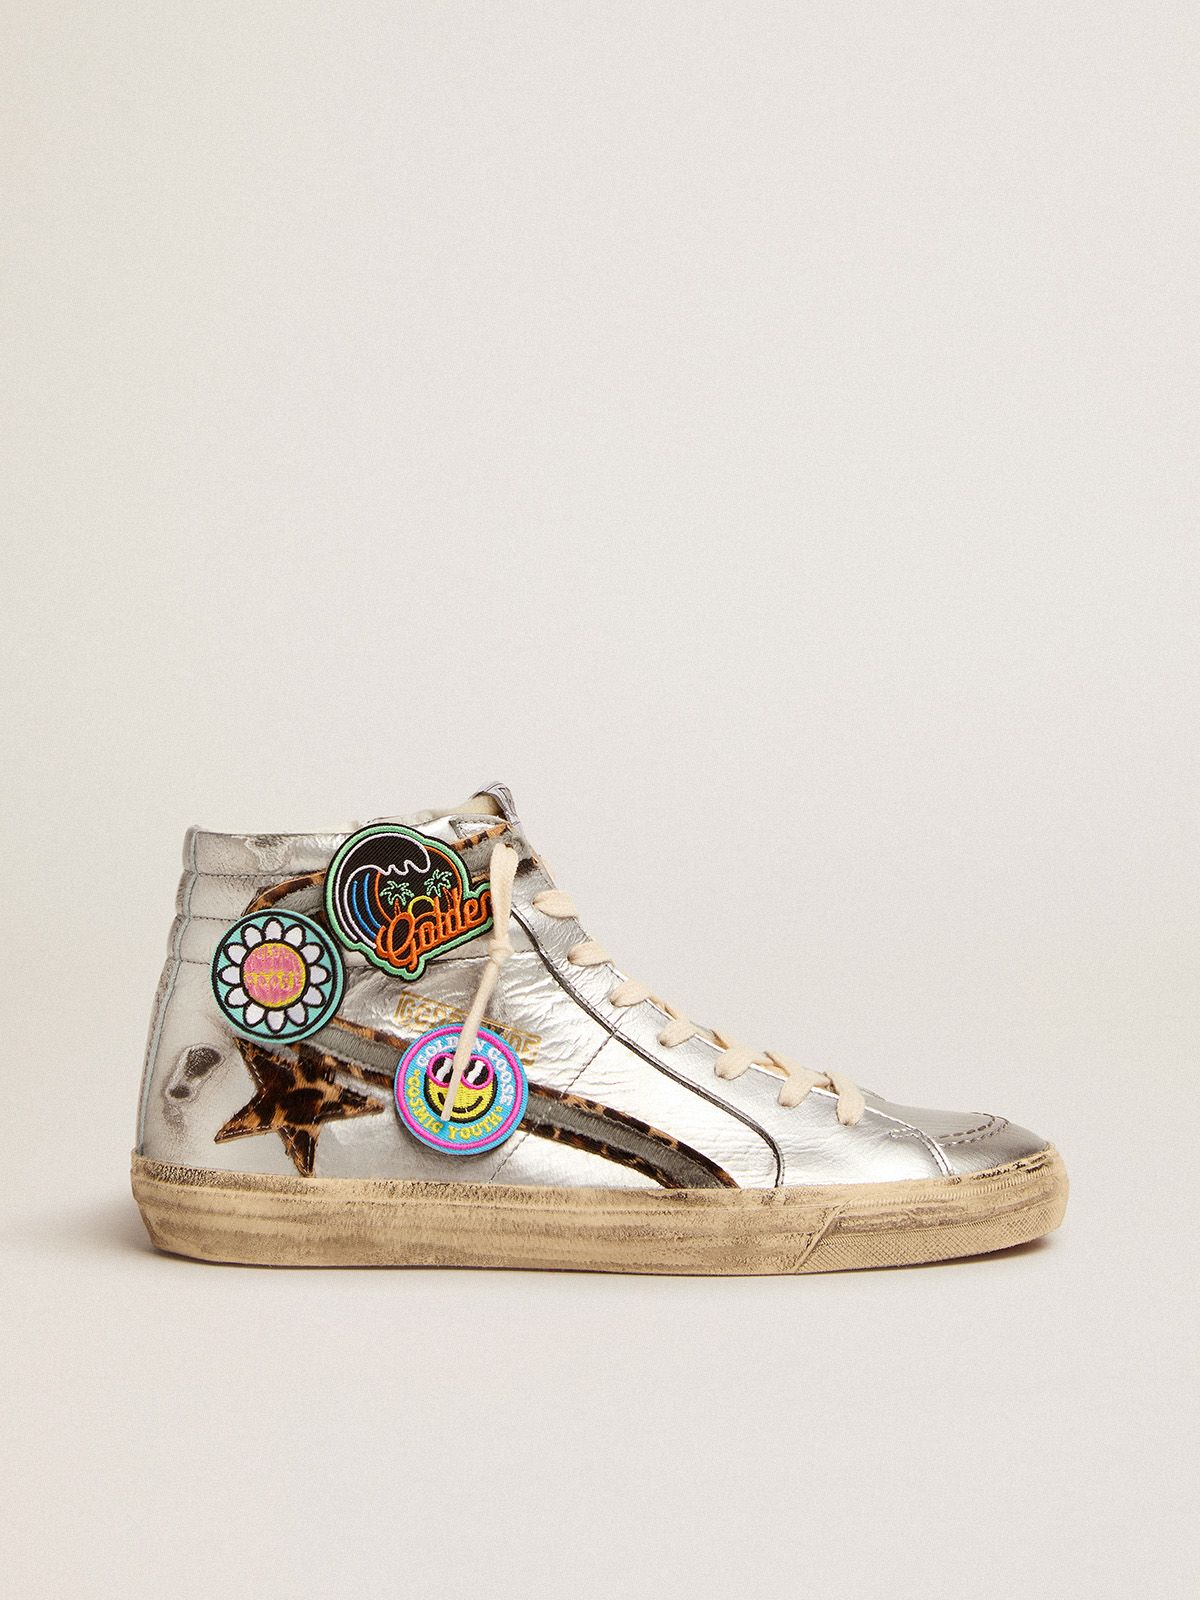 Slide sneakers in silver laminated leather with leopard-print pony skin star and flash with detachable multicolored patches | 